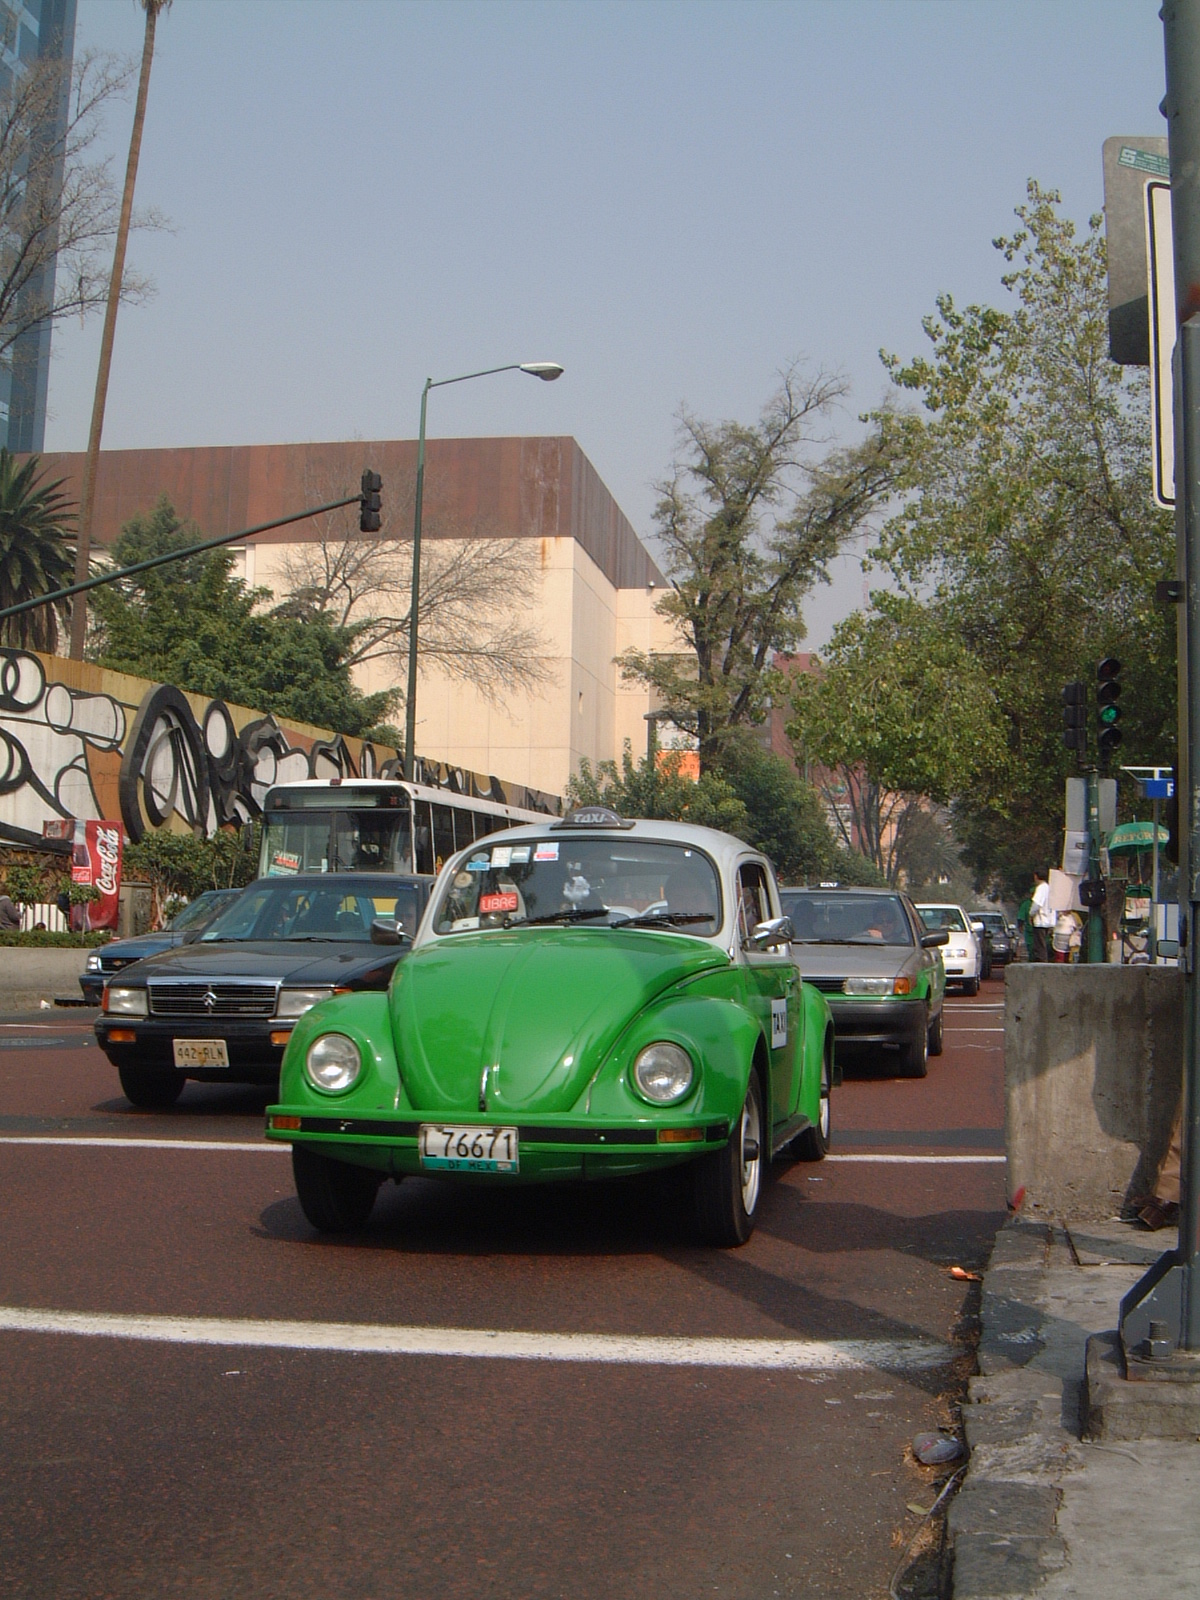 VW Beetle Taxi Green in Mexico City